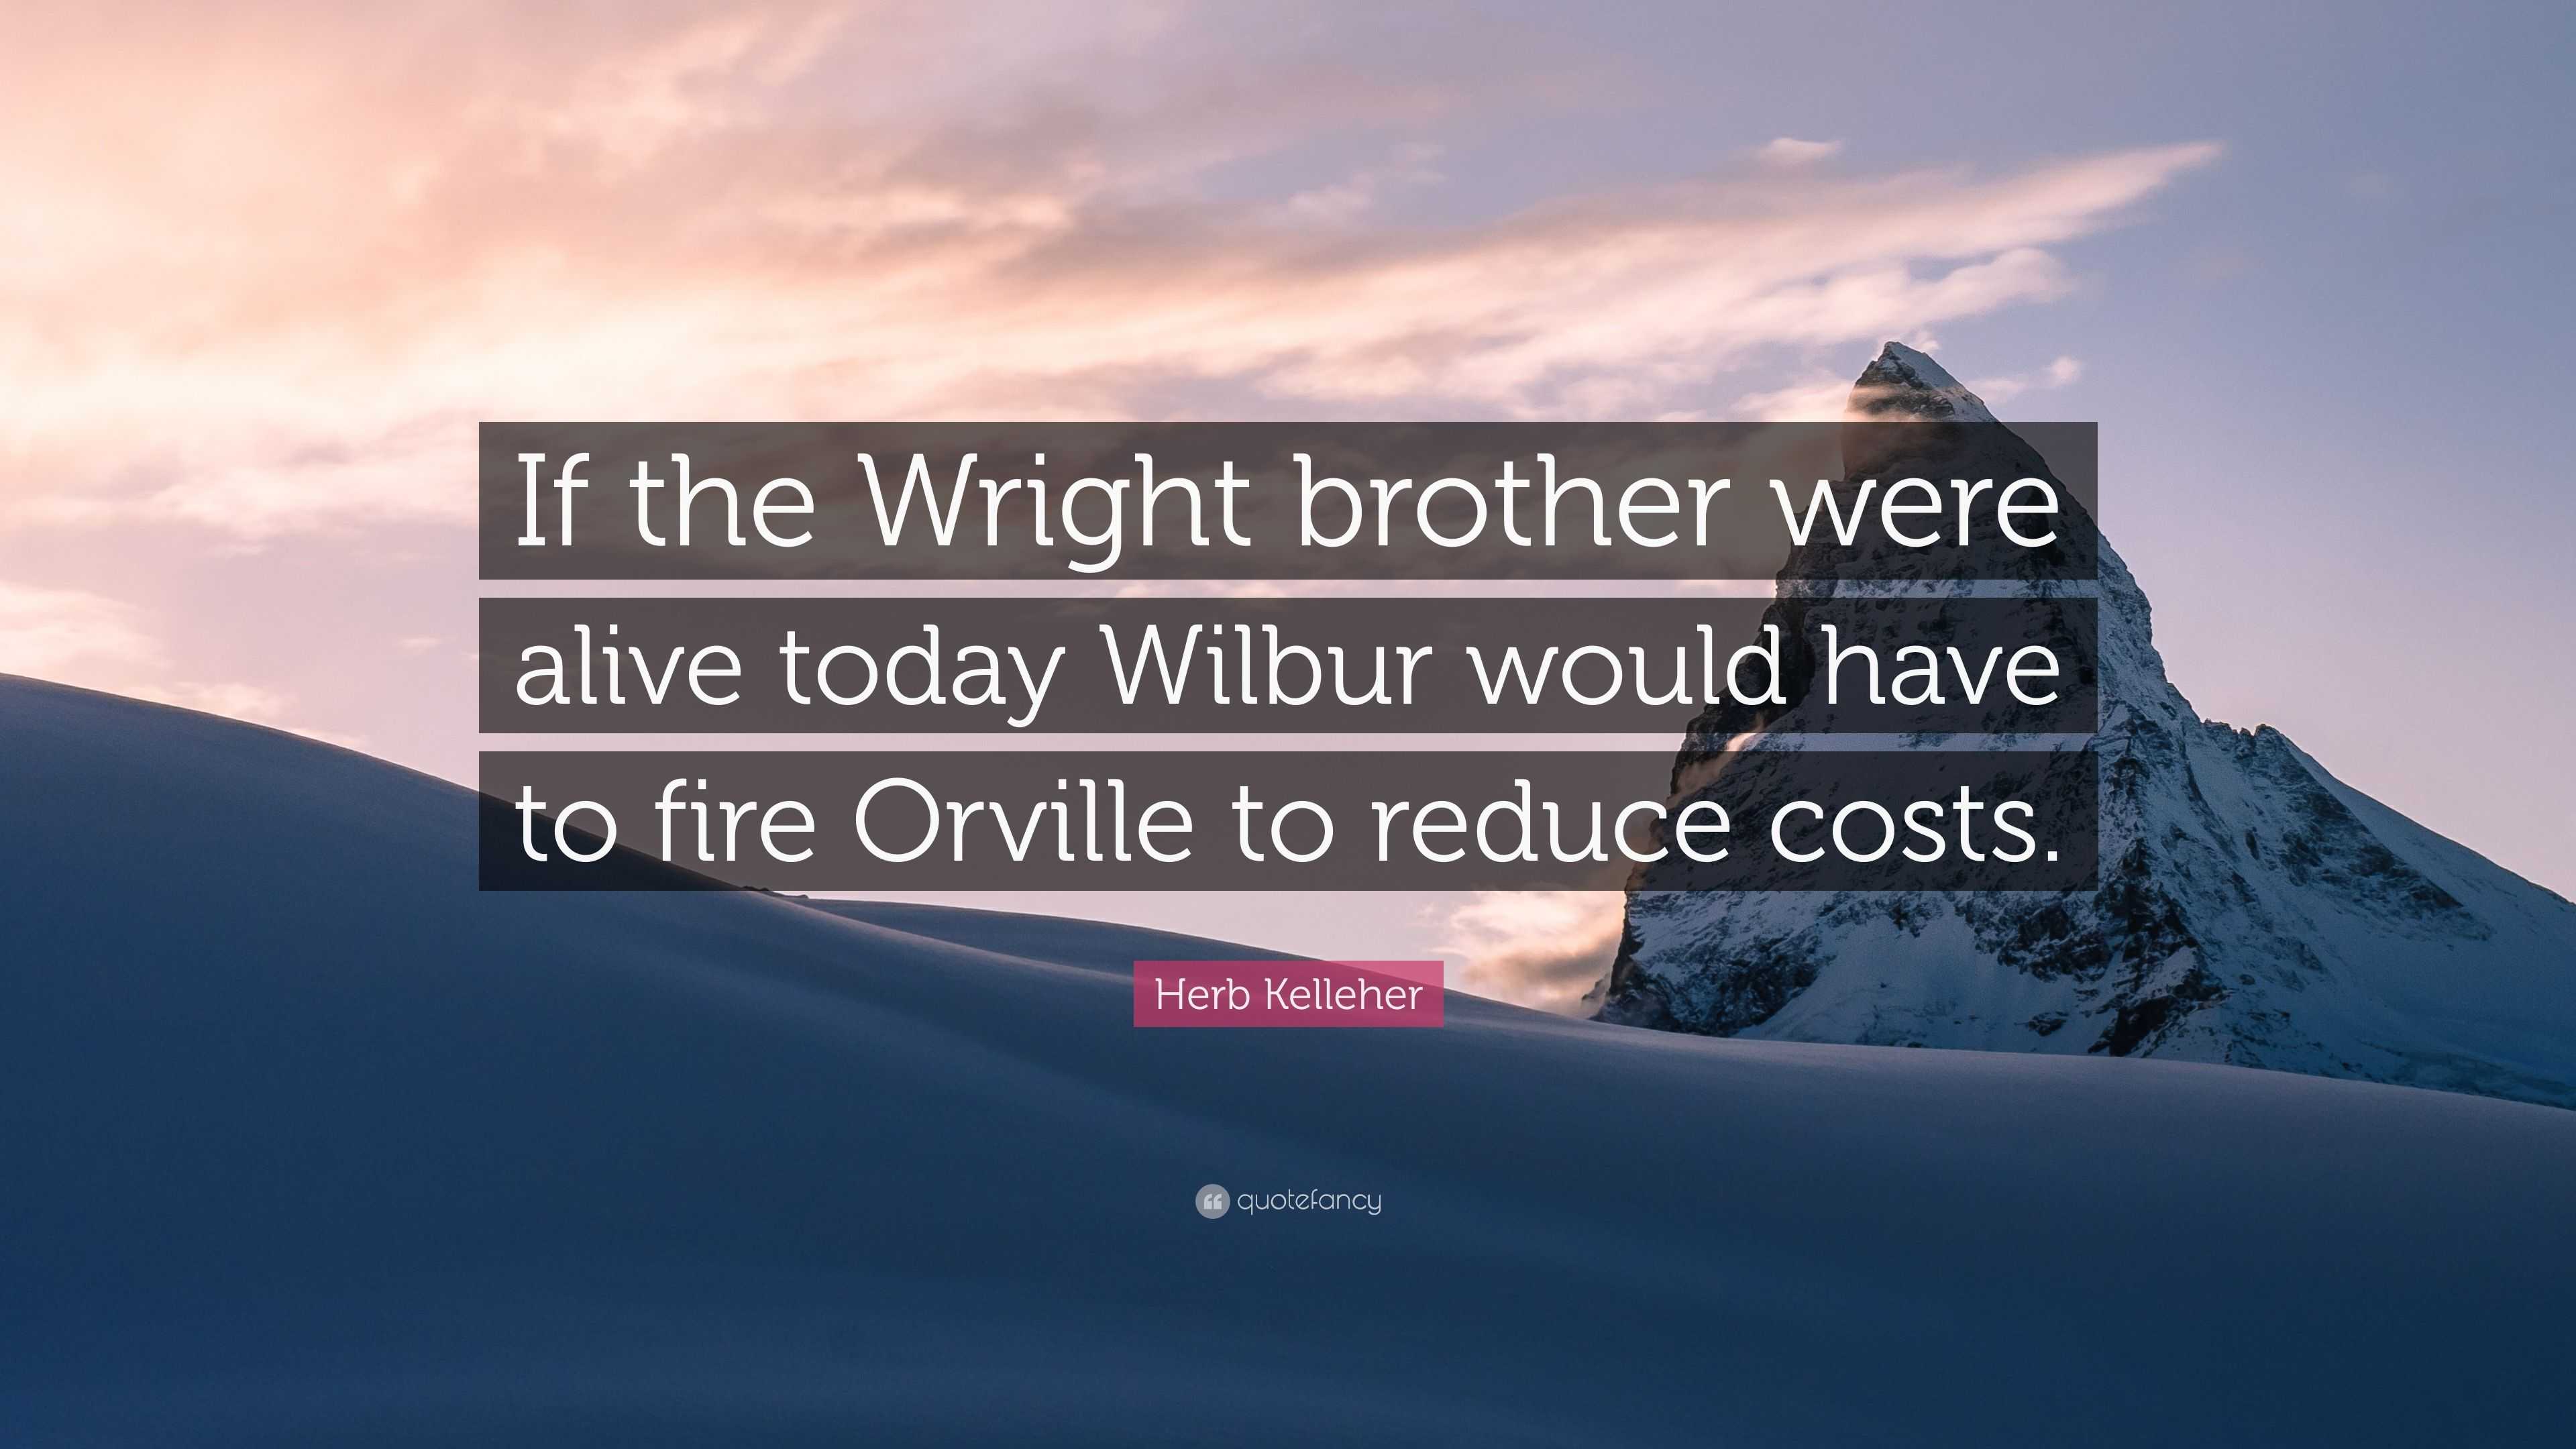 Herb Kelleher Quote: “If the Wright brother were alive today Wilbur